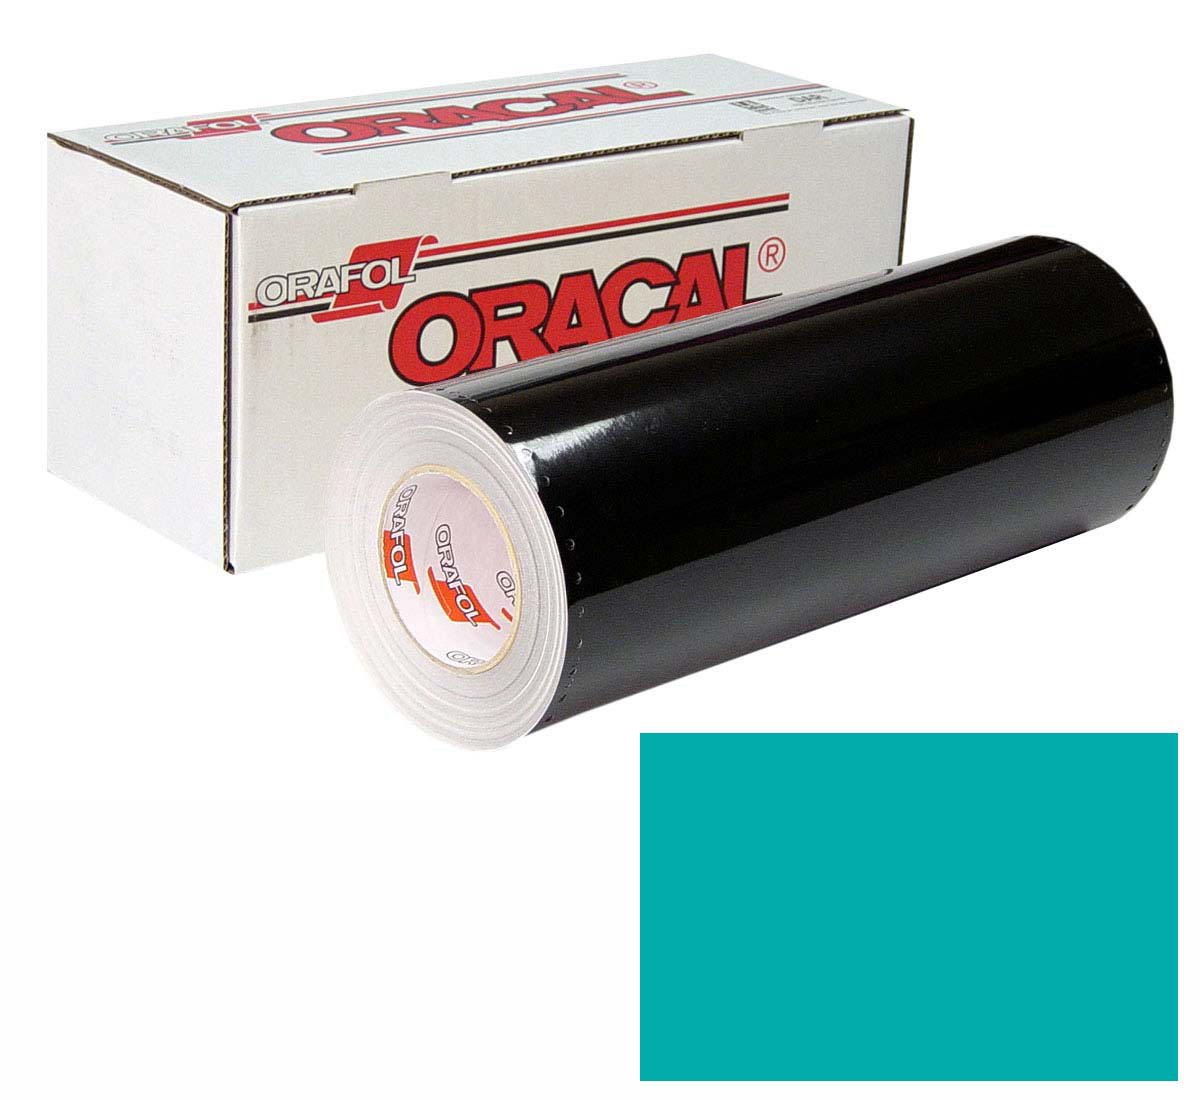 ORACAL 641 Unp 48in X 50yd 054 Turquoise